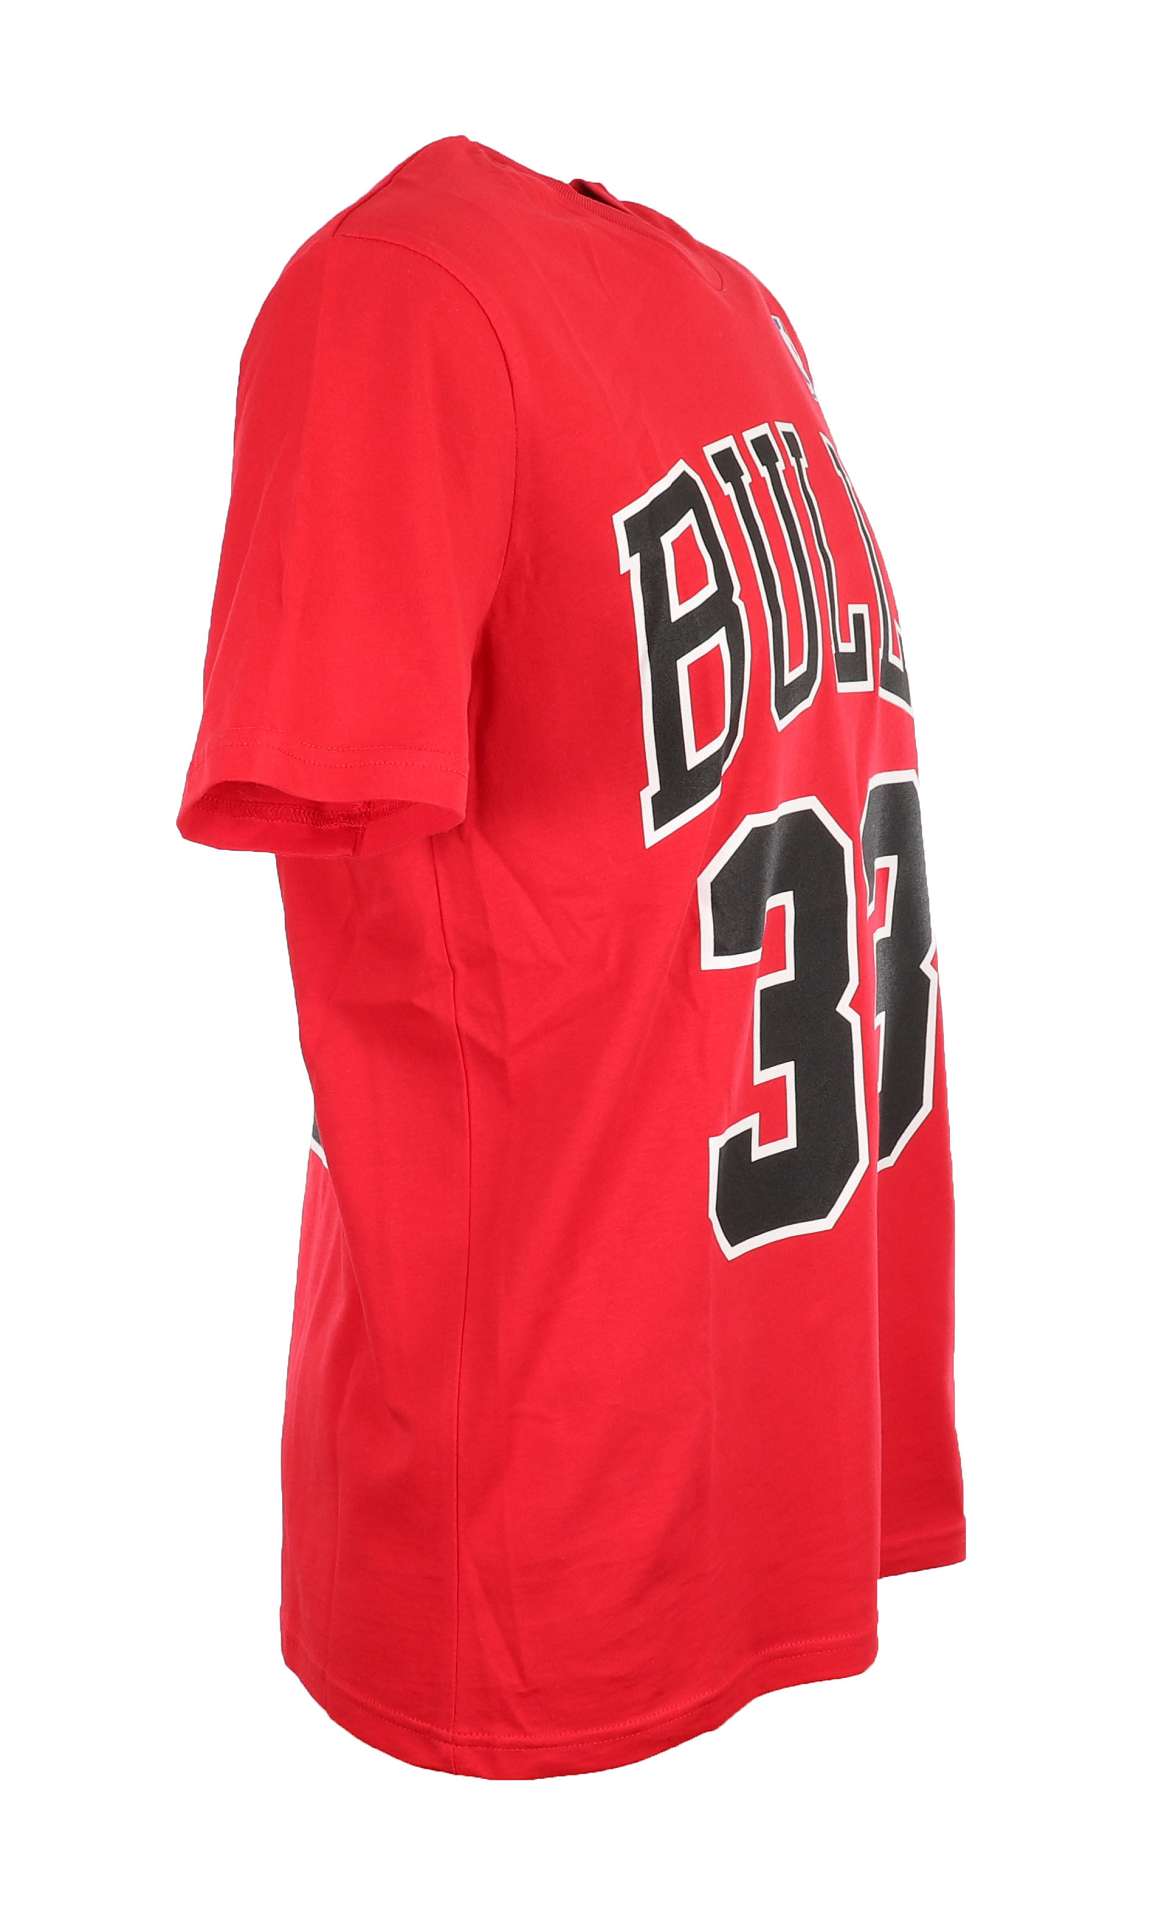 Scottie Pippen #33 Chicago Bulls Red NBA Name and Number Tee T-Shirt Mitchell & Ness